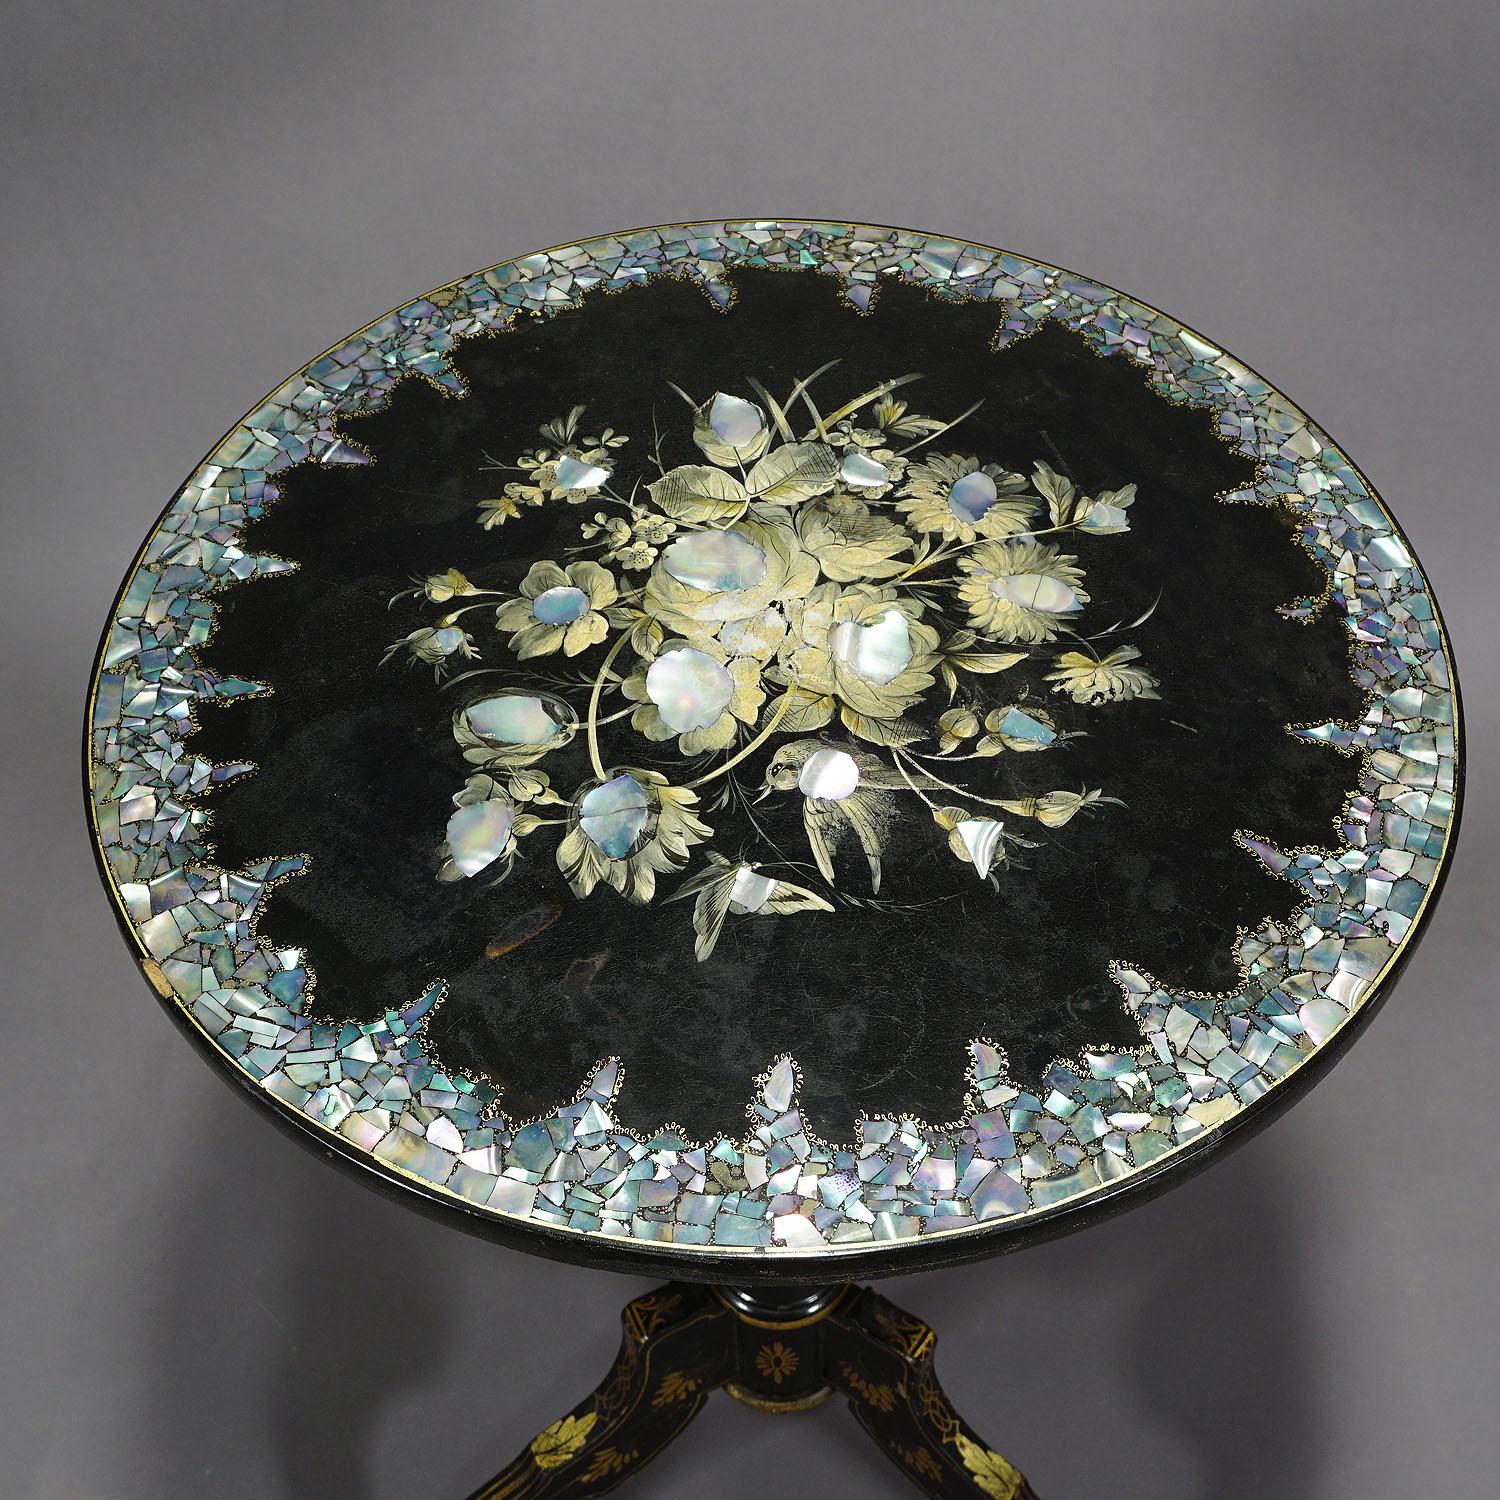 A wonderful ebonized side table made of wood. Rotable tabletop with mother of pearl inlays and flower paintings. Base decorated with gilded floral paintings. Probably, French, circa 1890. Good condition with some paint abreasions on top and